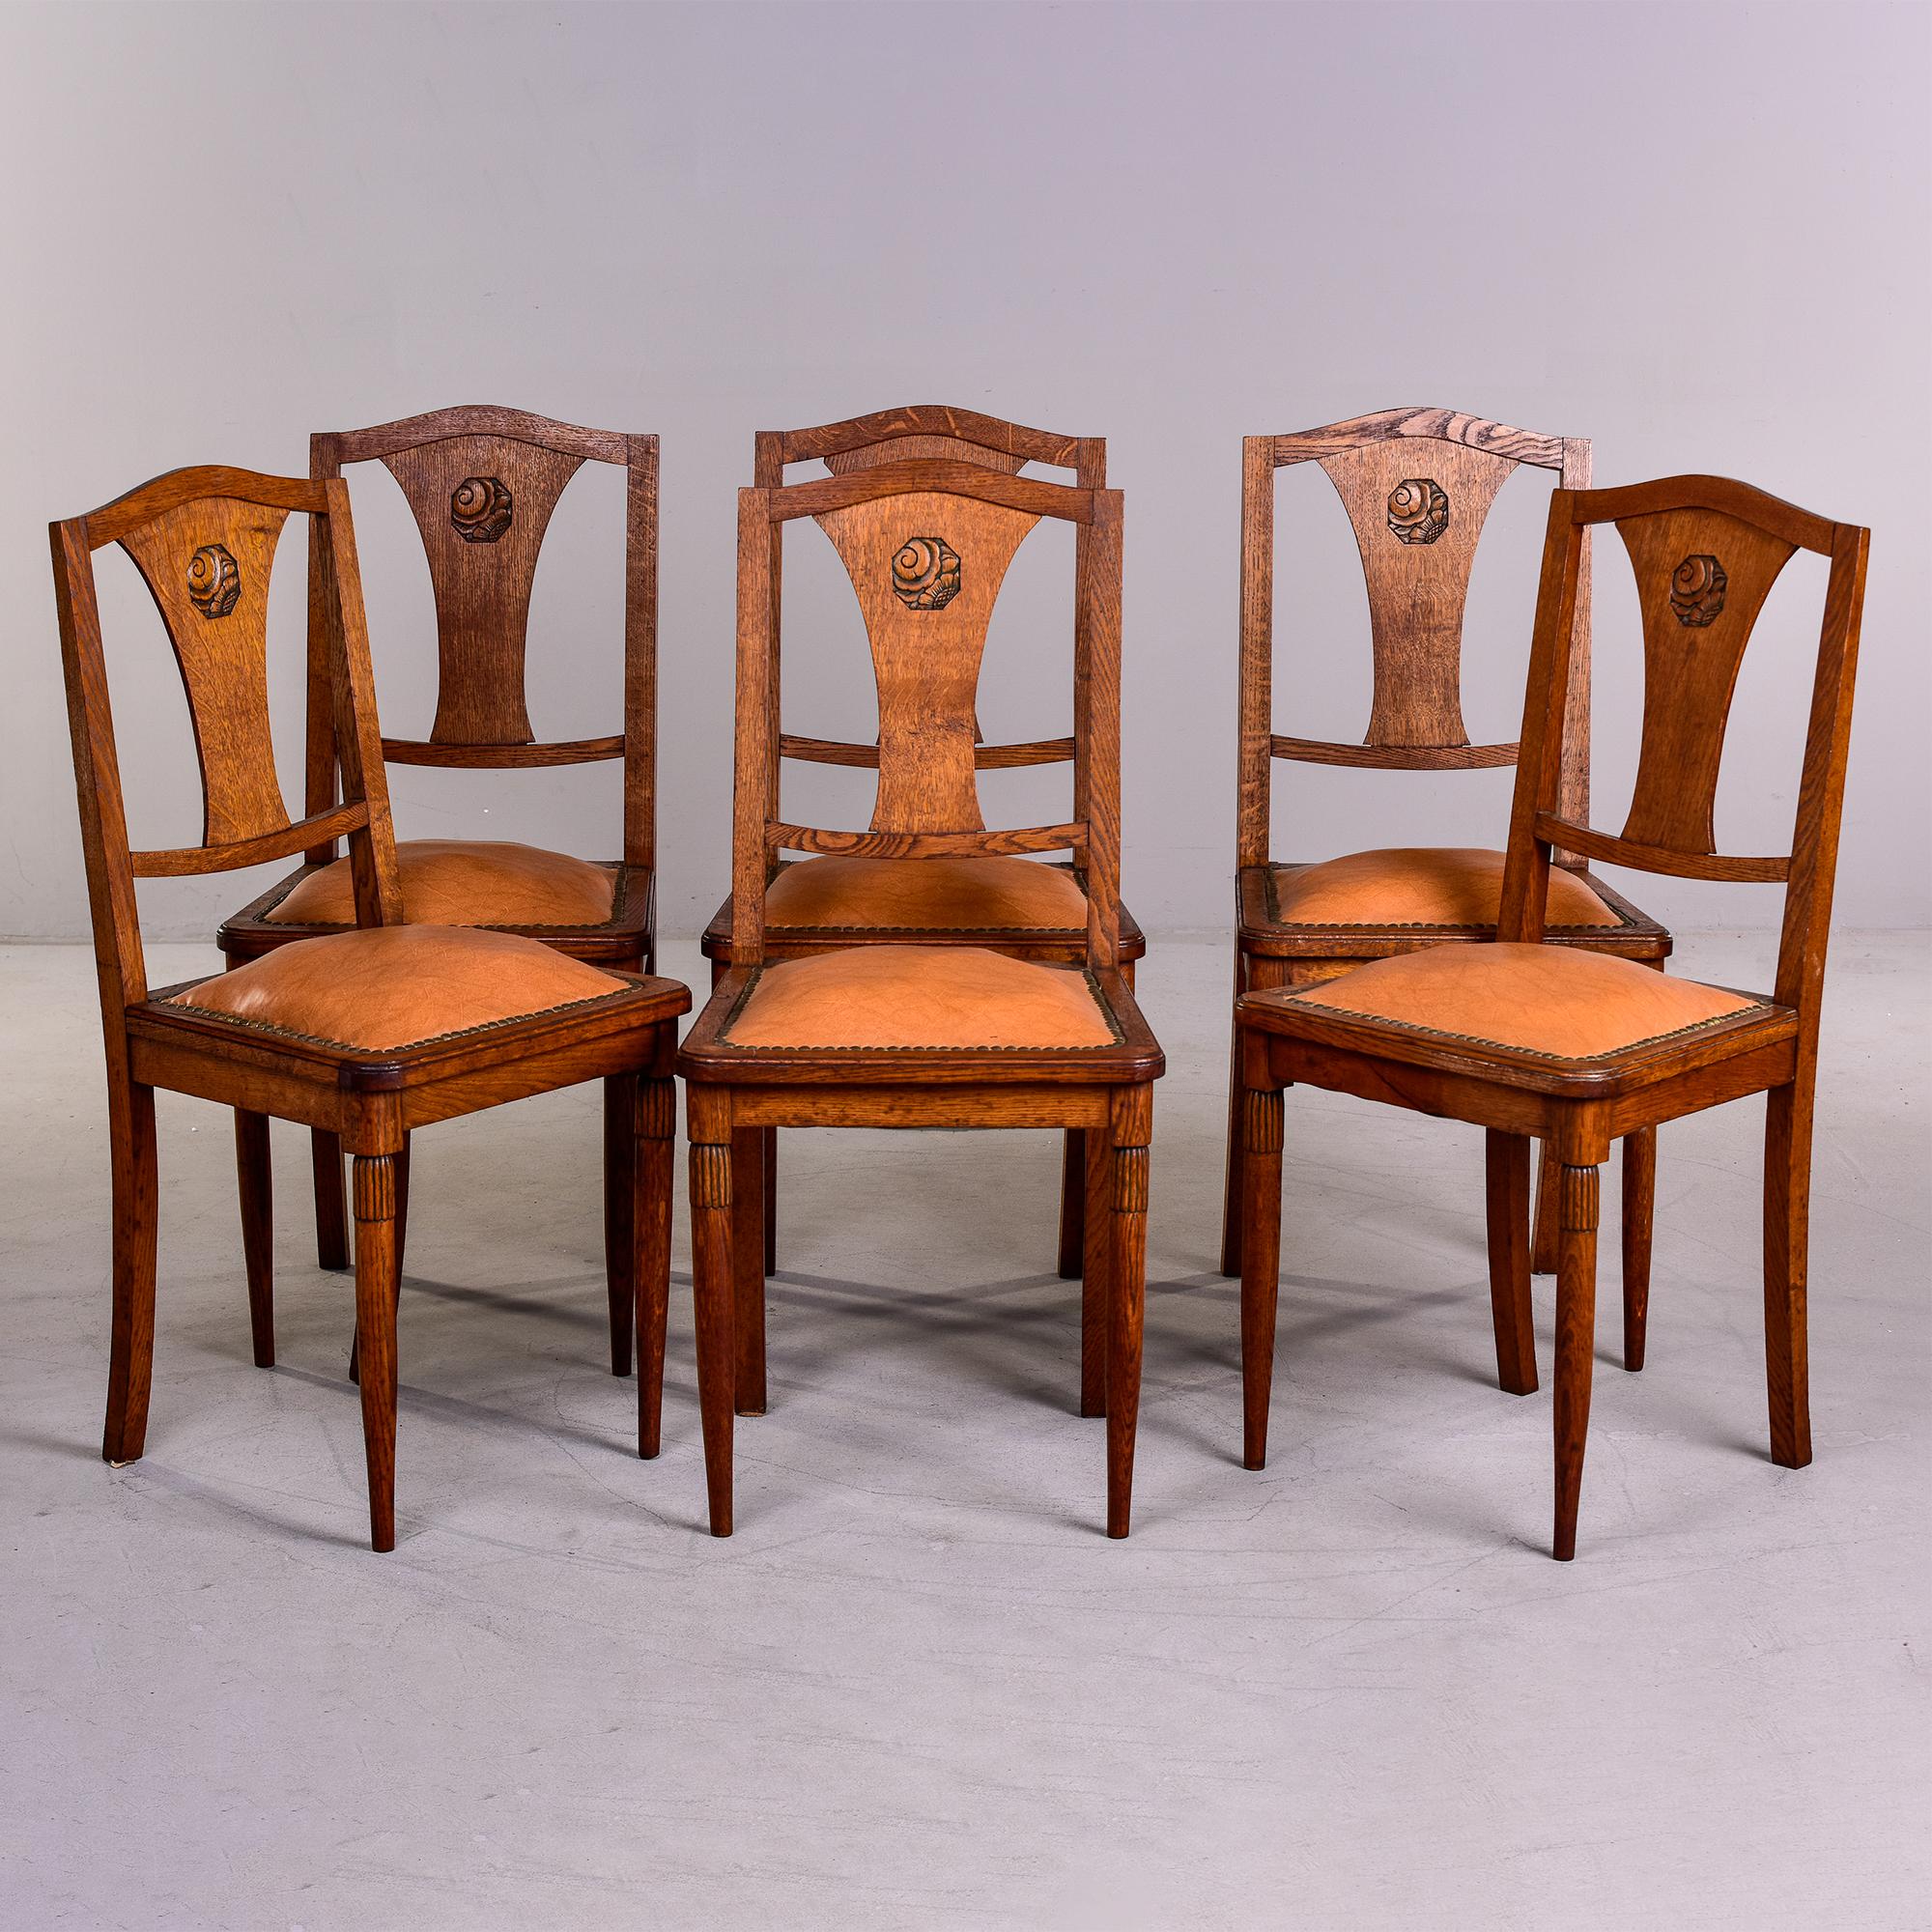 Circa 1920s set of six French oak dining chairs attributed to Majorelle. Acquired from a French estate - the dining table they surrounded was a documented Majorelle piece and owners claimed the chairs were as well, but we have not been able to